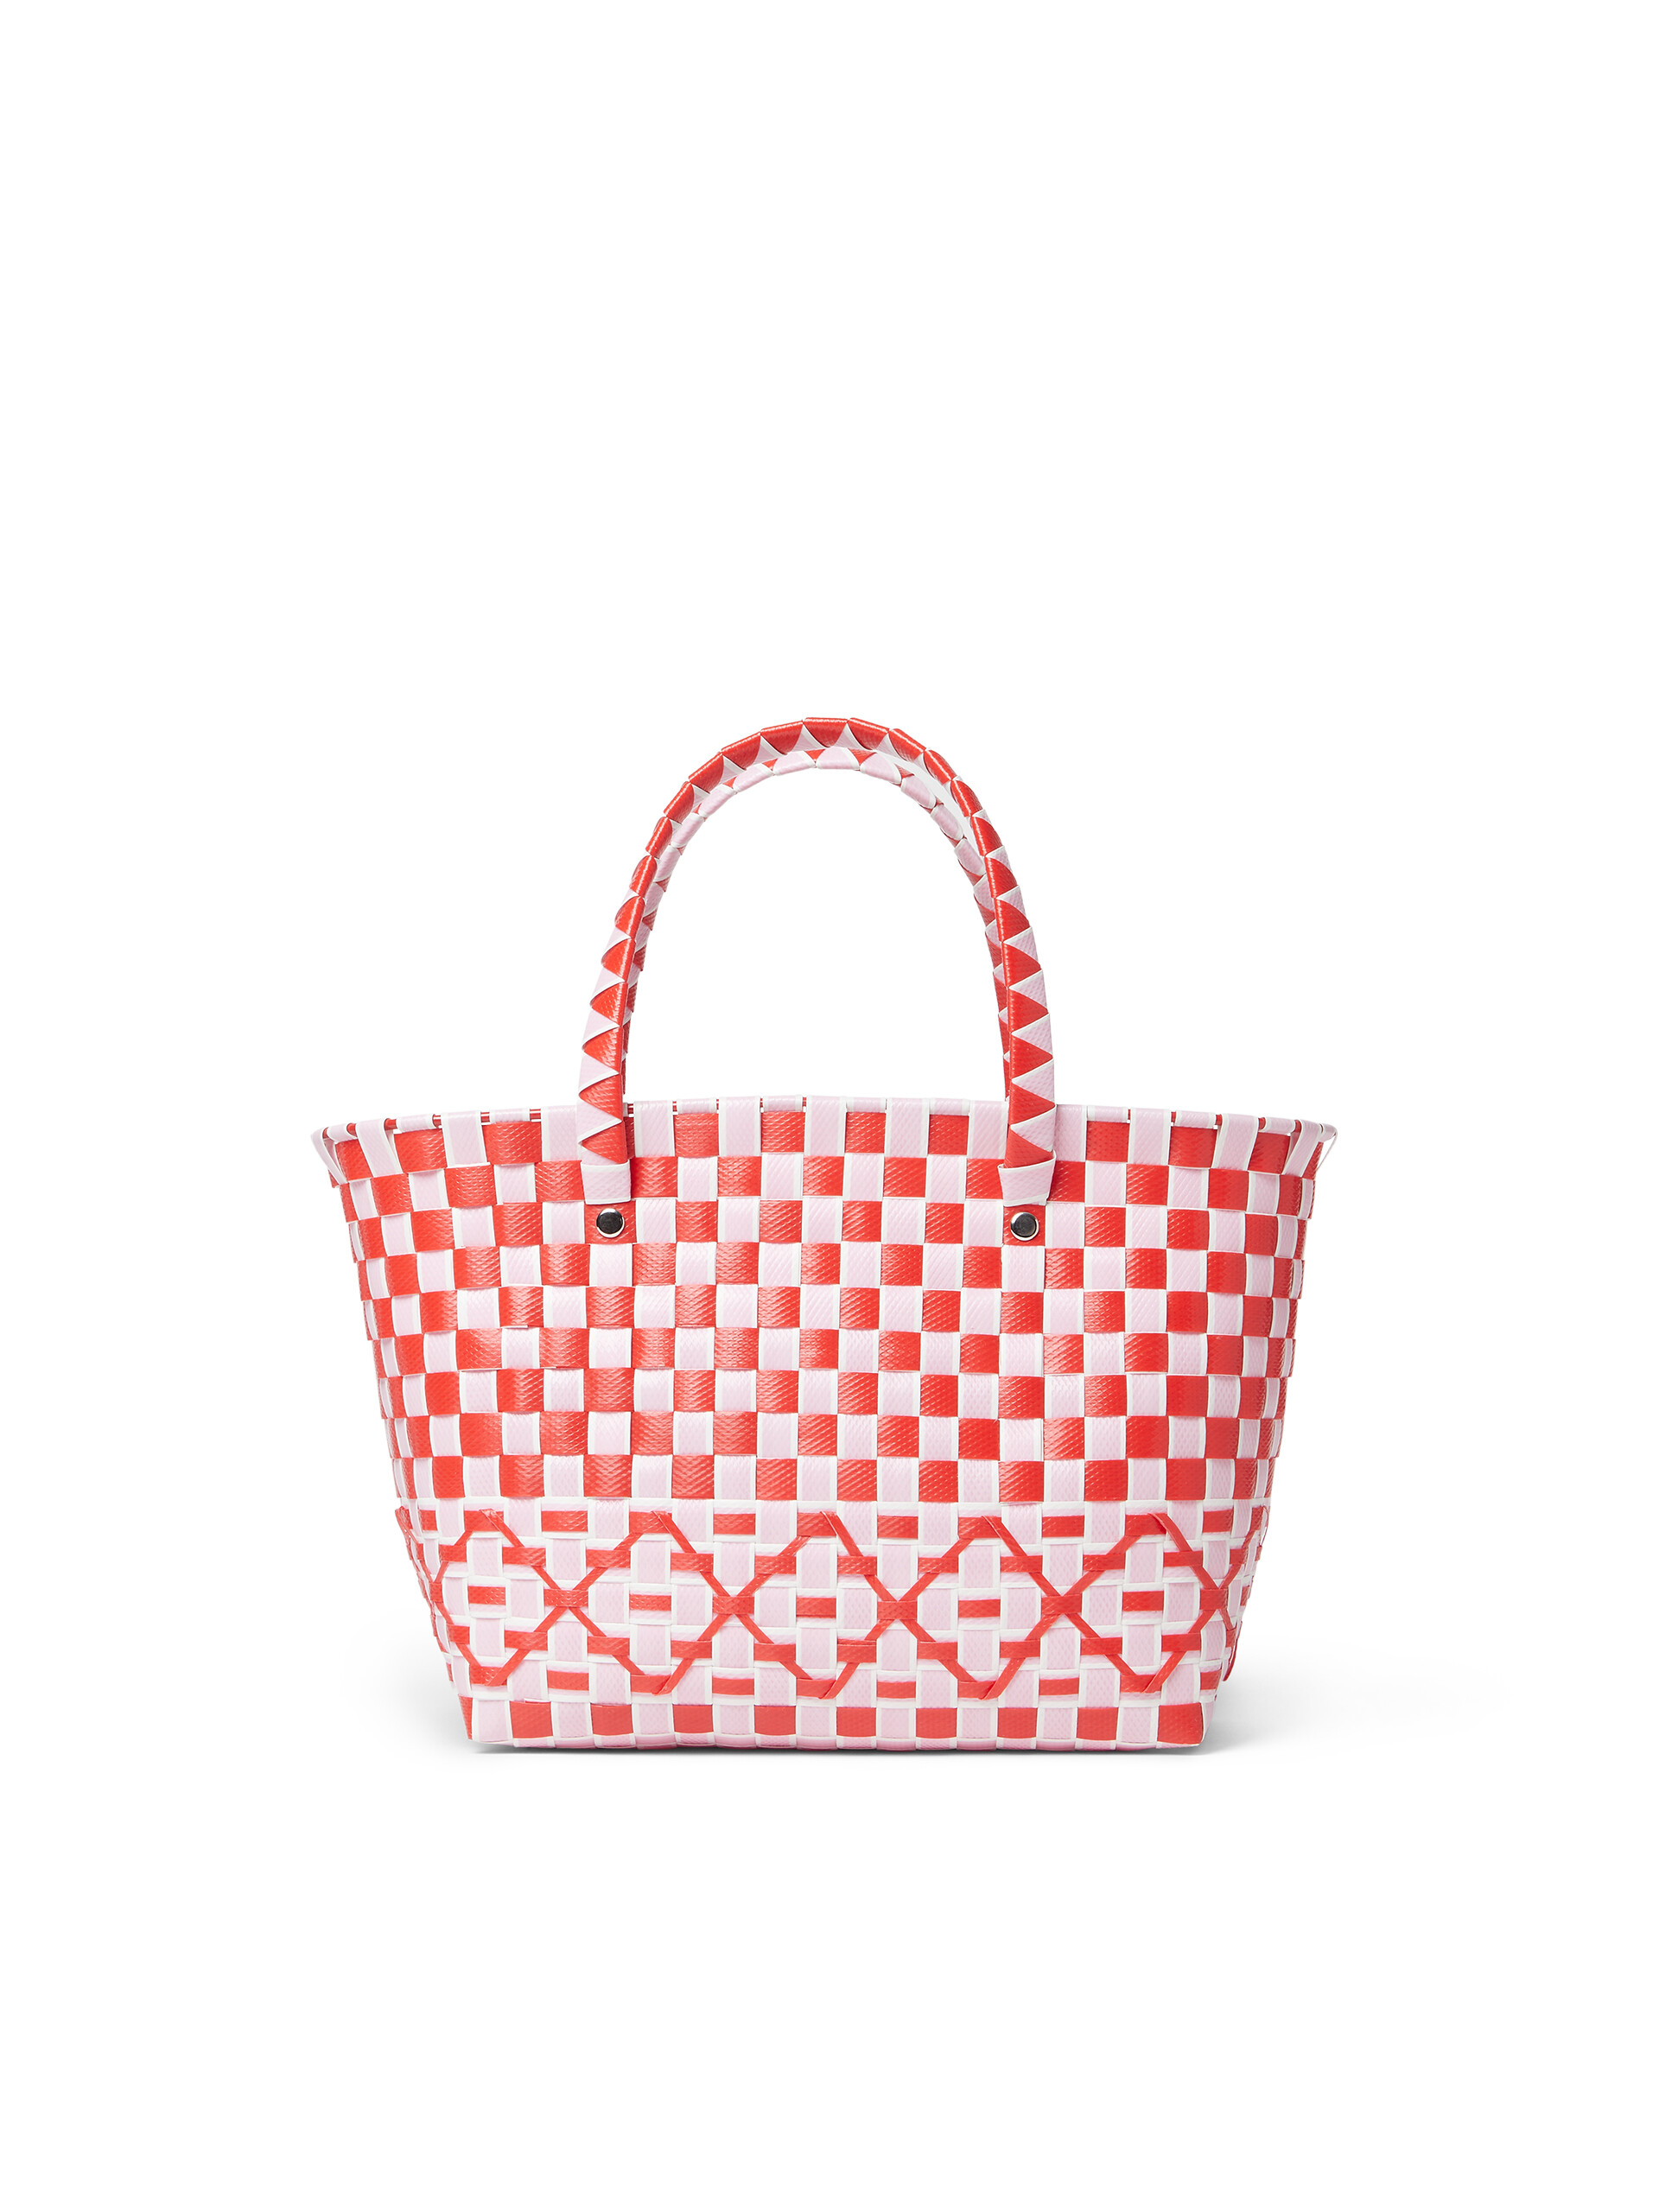 Blue and red woven MARNI MARKET OVAL bag - Shopping Bags - Image 3